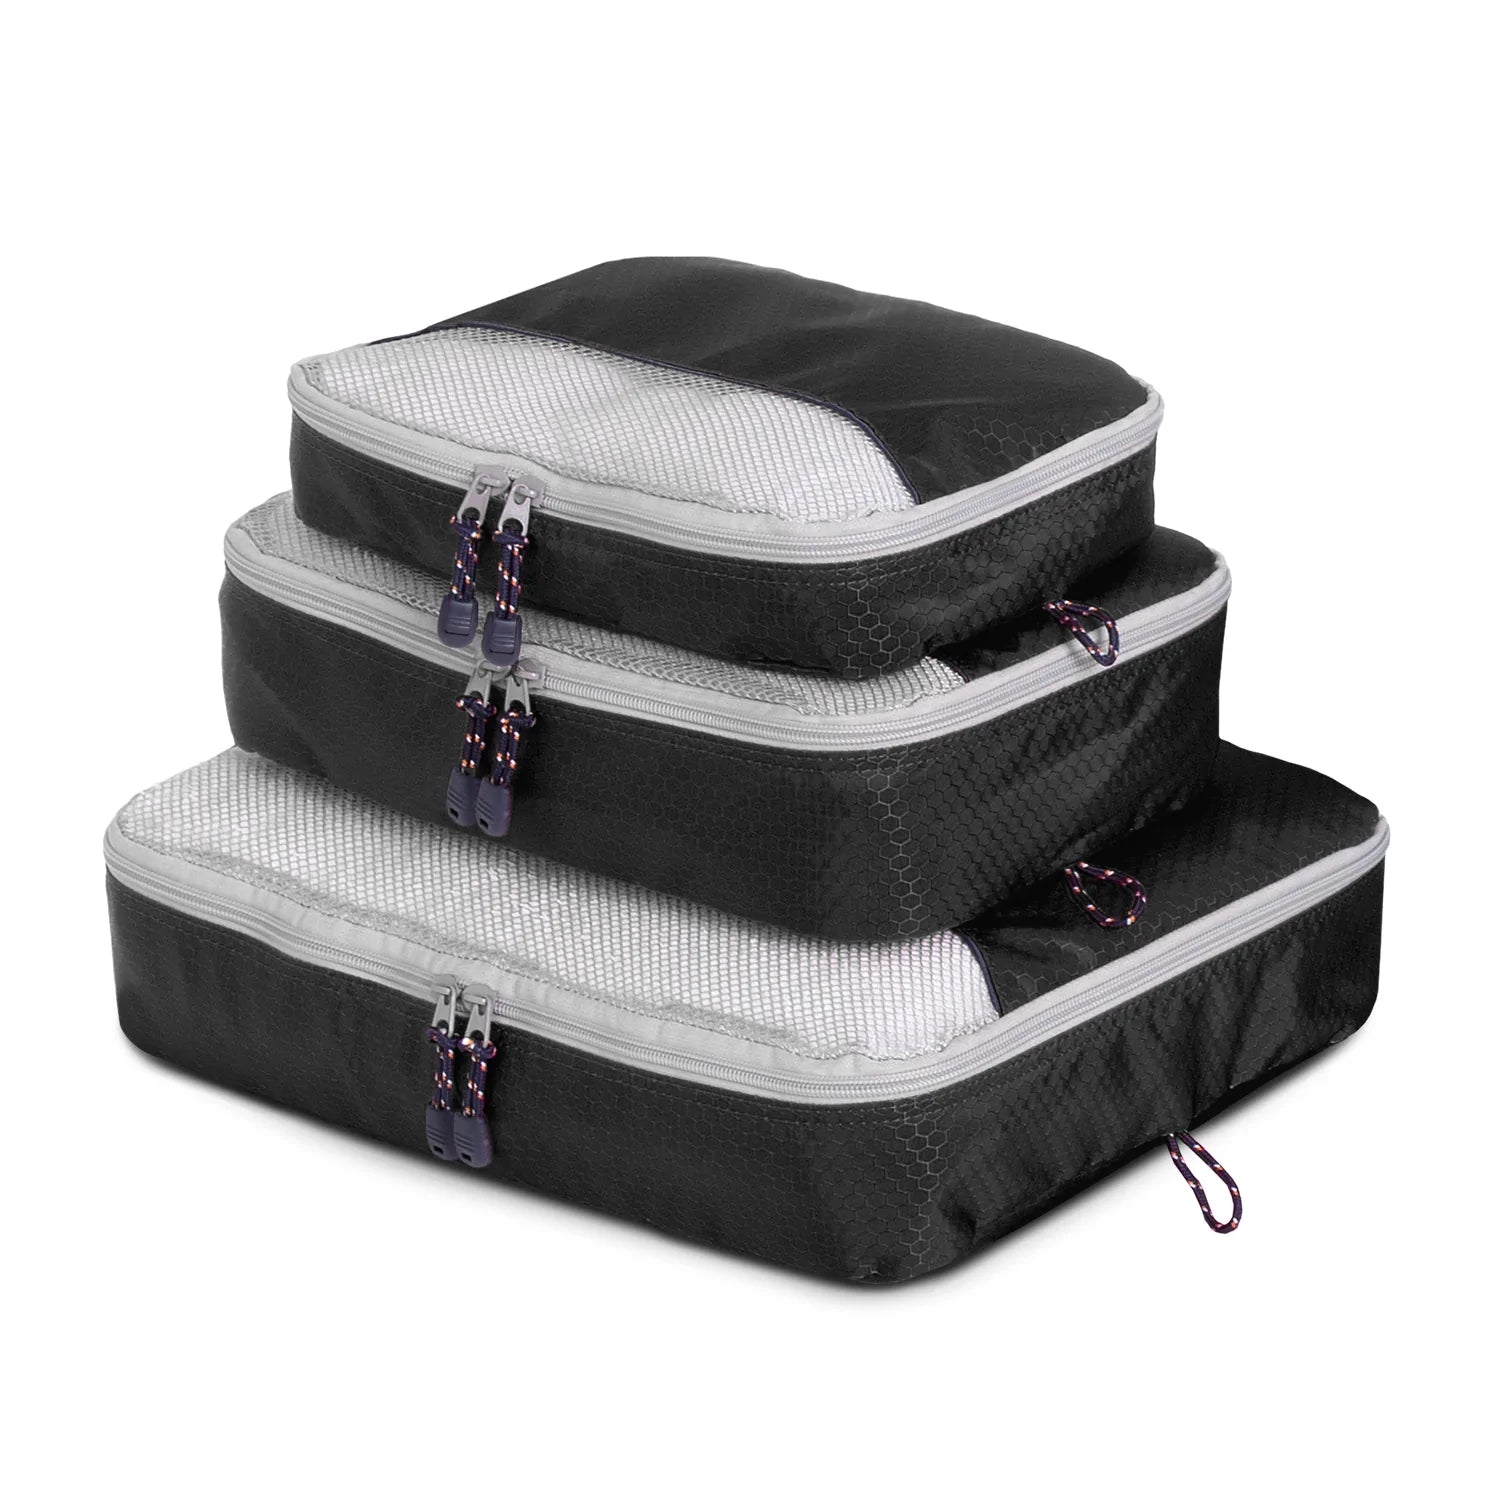 Globite 3 Piece Packing Cube Set